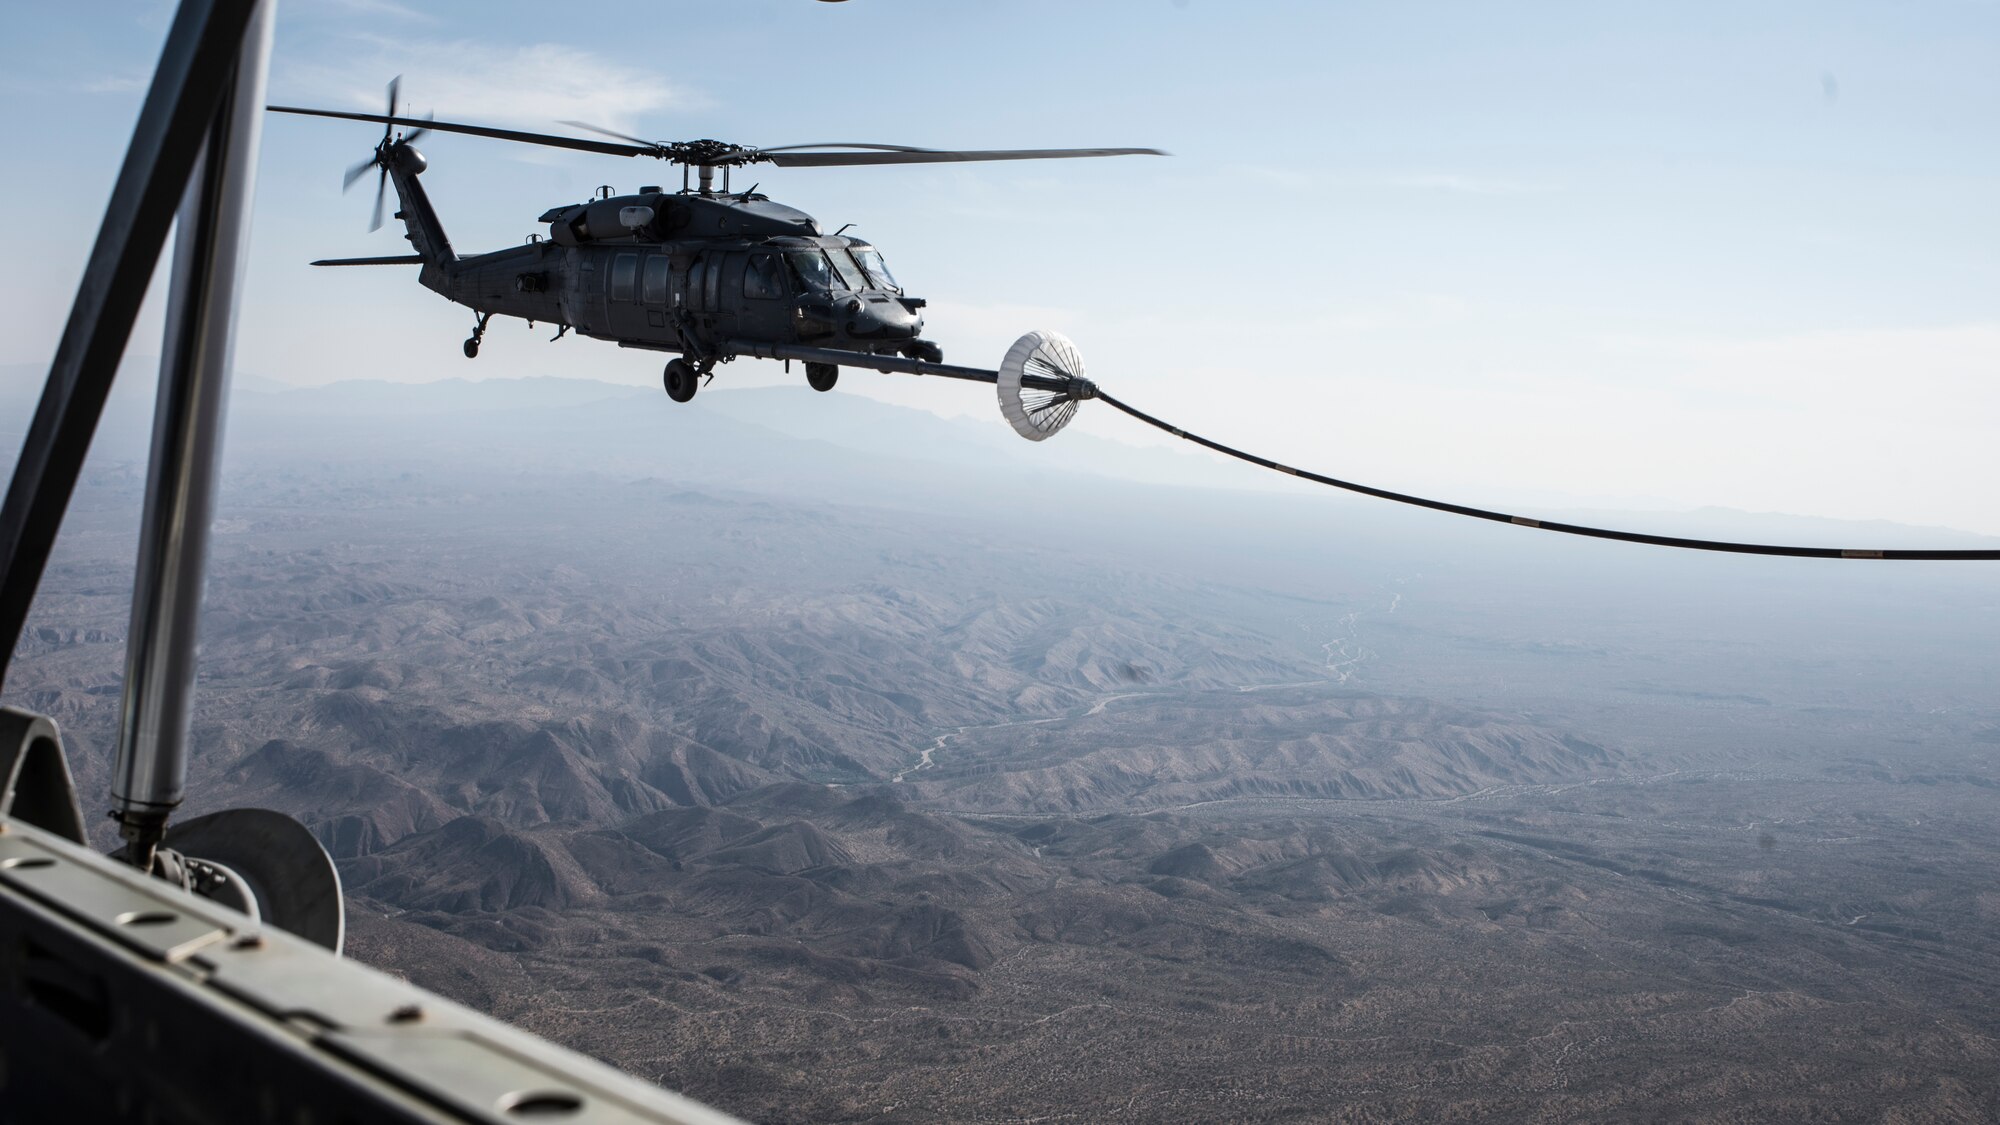 A photo of a helicopter performing air-to-air refueling